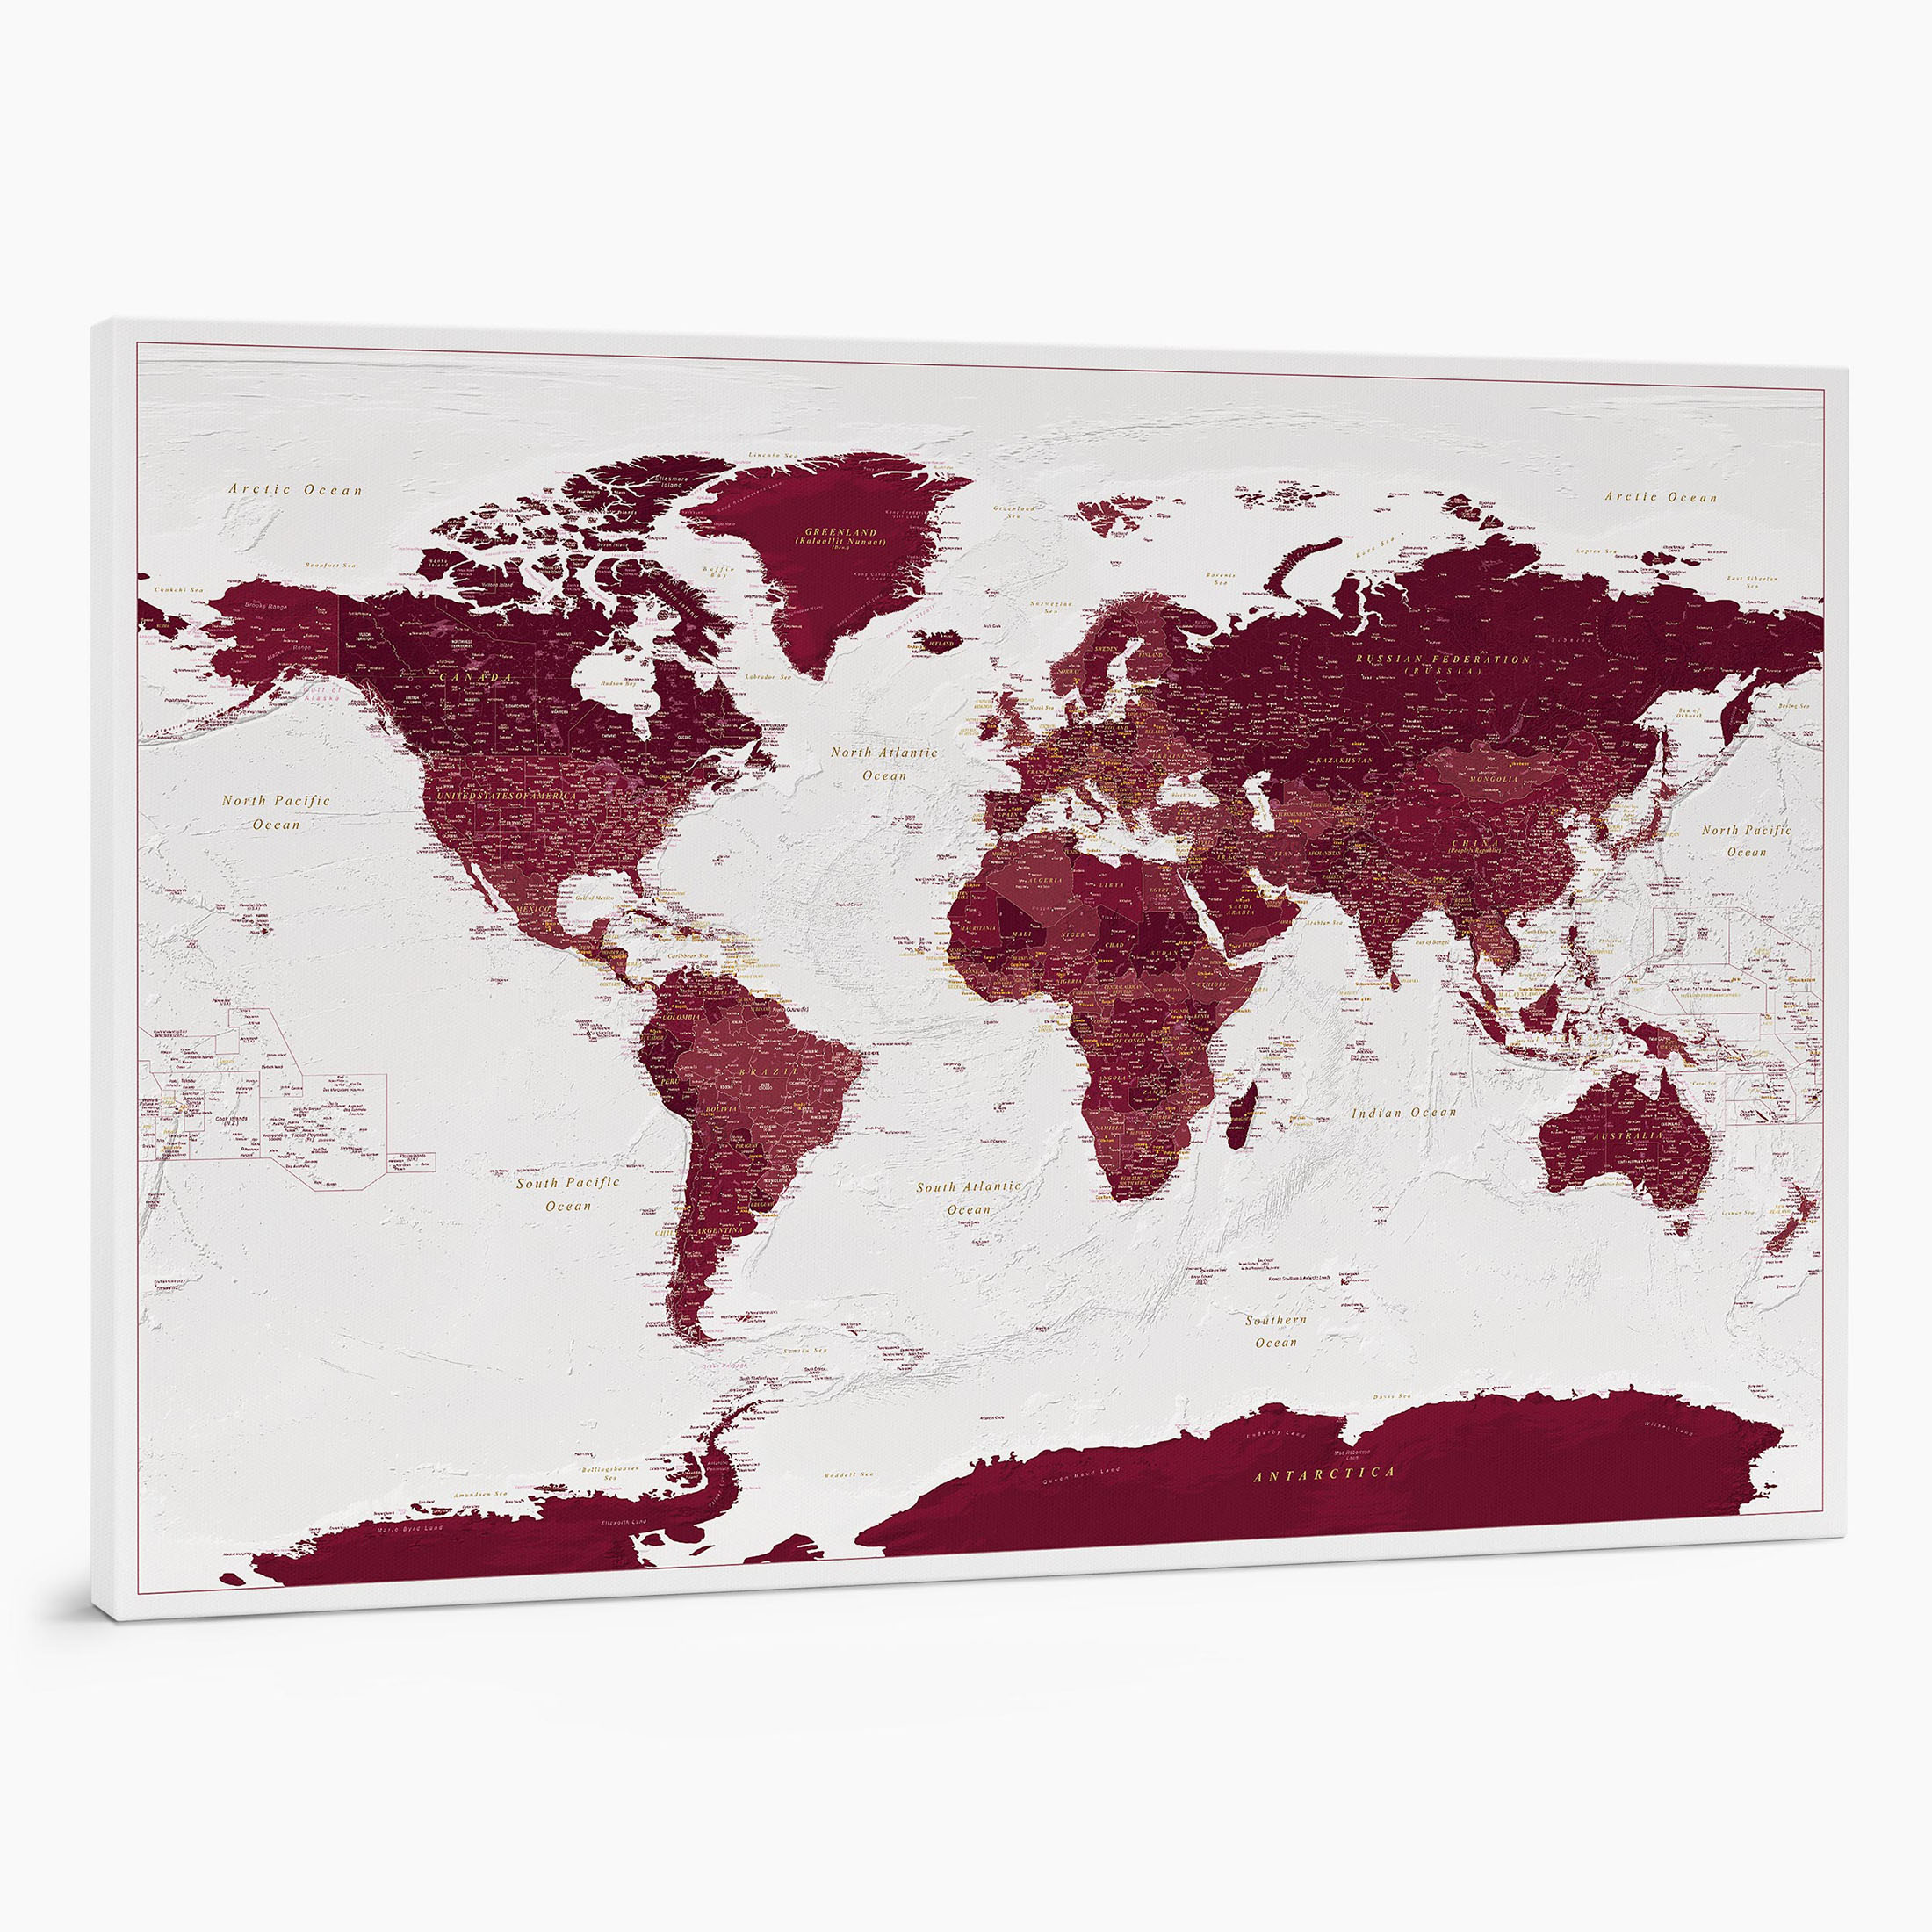 21P large push pin world map to track places visited on canvas burgundy